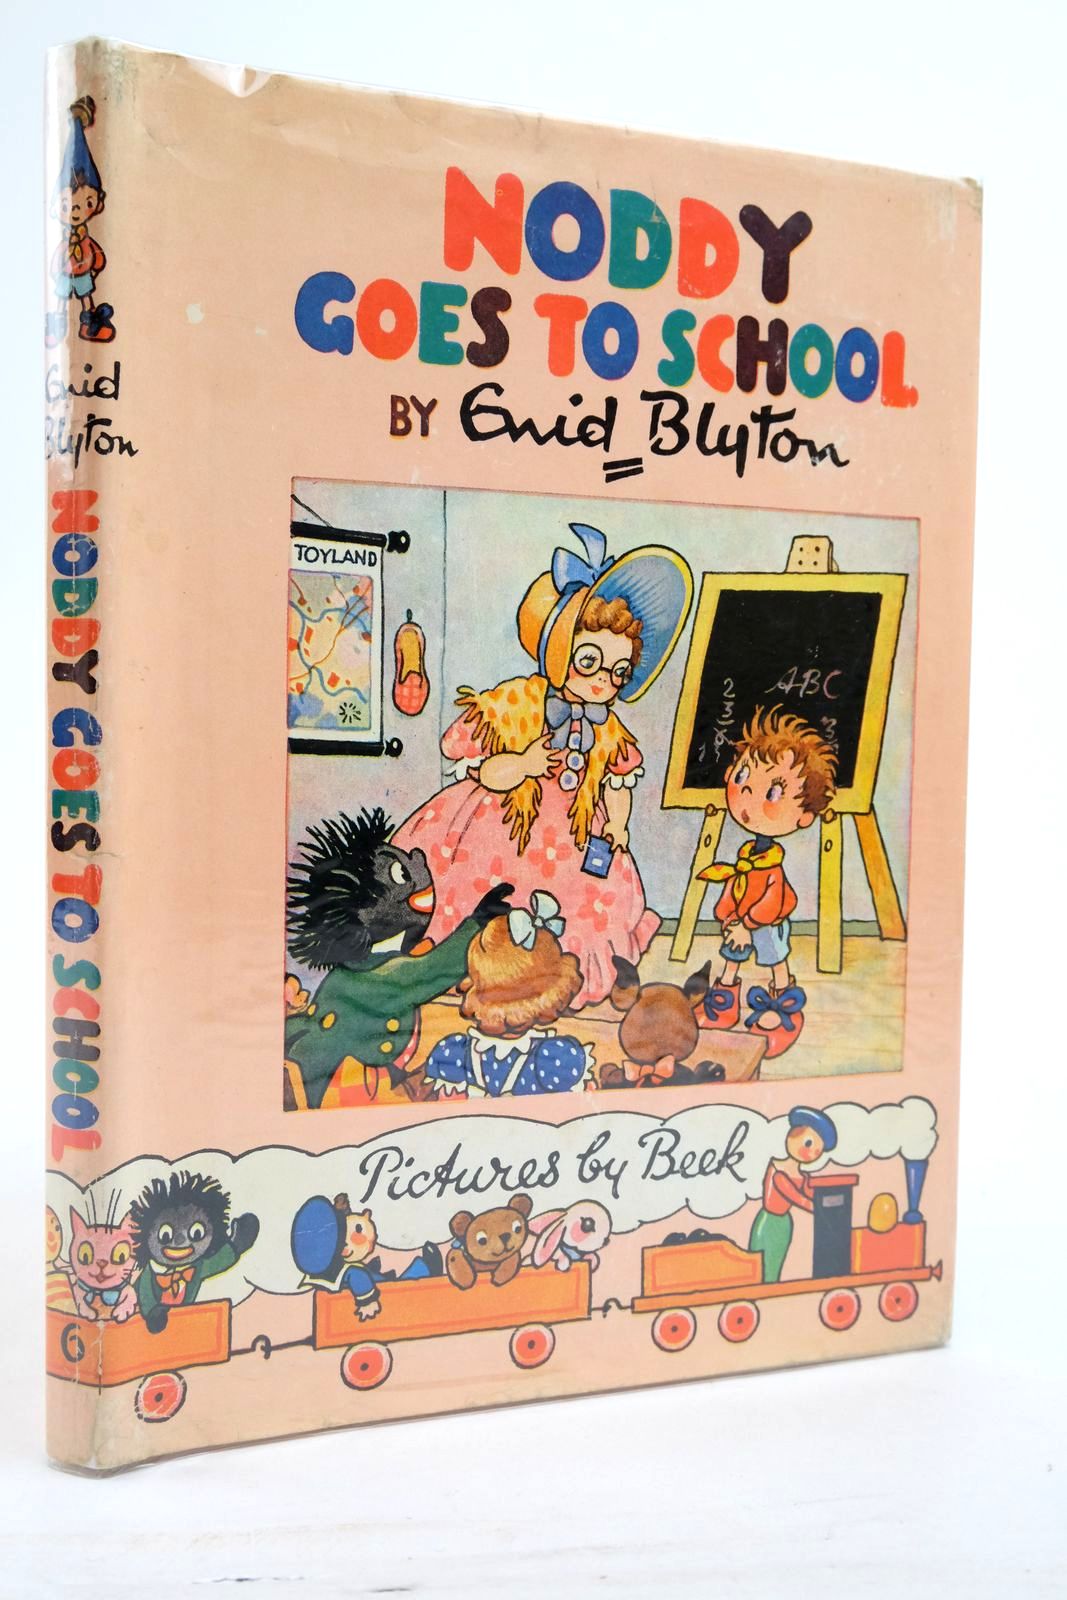 Photo of NODDY GOES TO SCHOOL written by Blyton, Enid illustrated by Beek,  published by Sampson Low, Marston & Co. Ltd., D.V. Publications Ltd. (STOCK CODE: 2136962)  for sale by Stella & Rose's Books